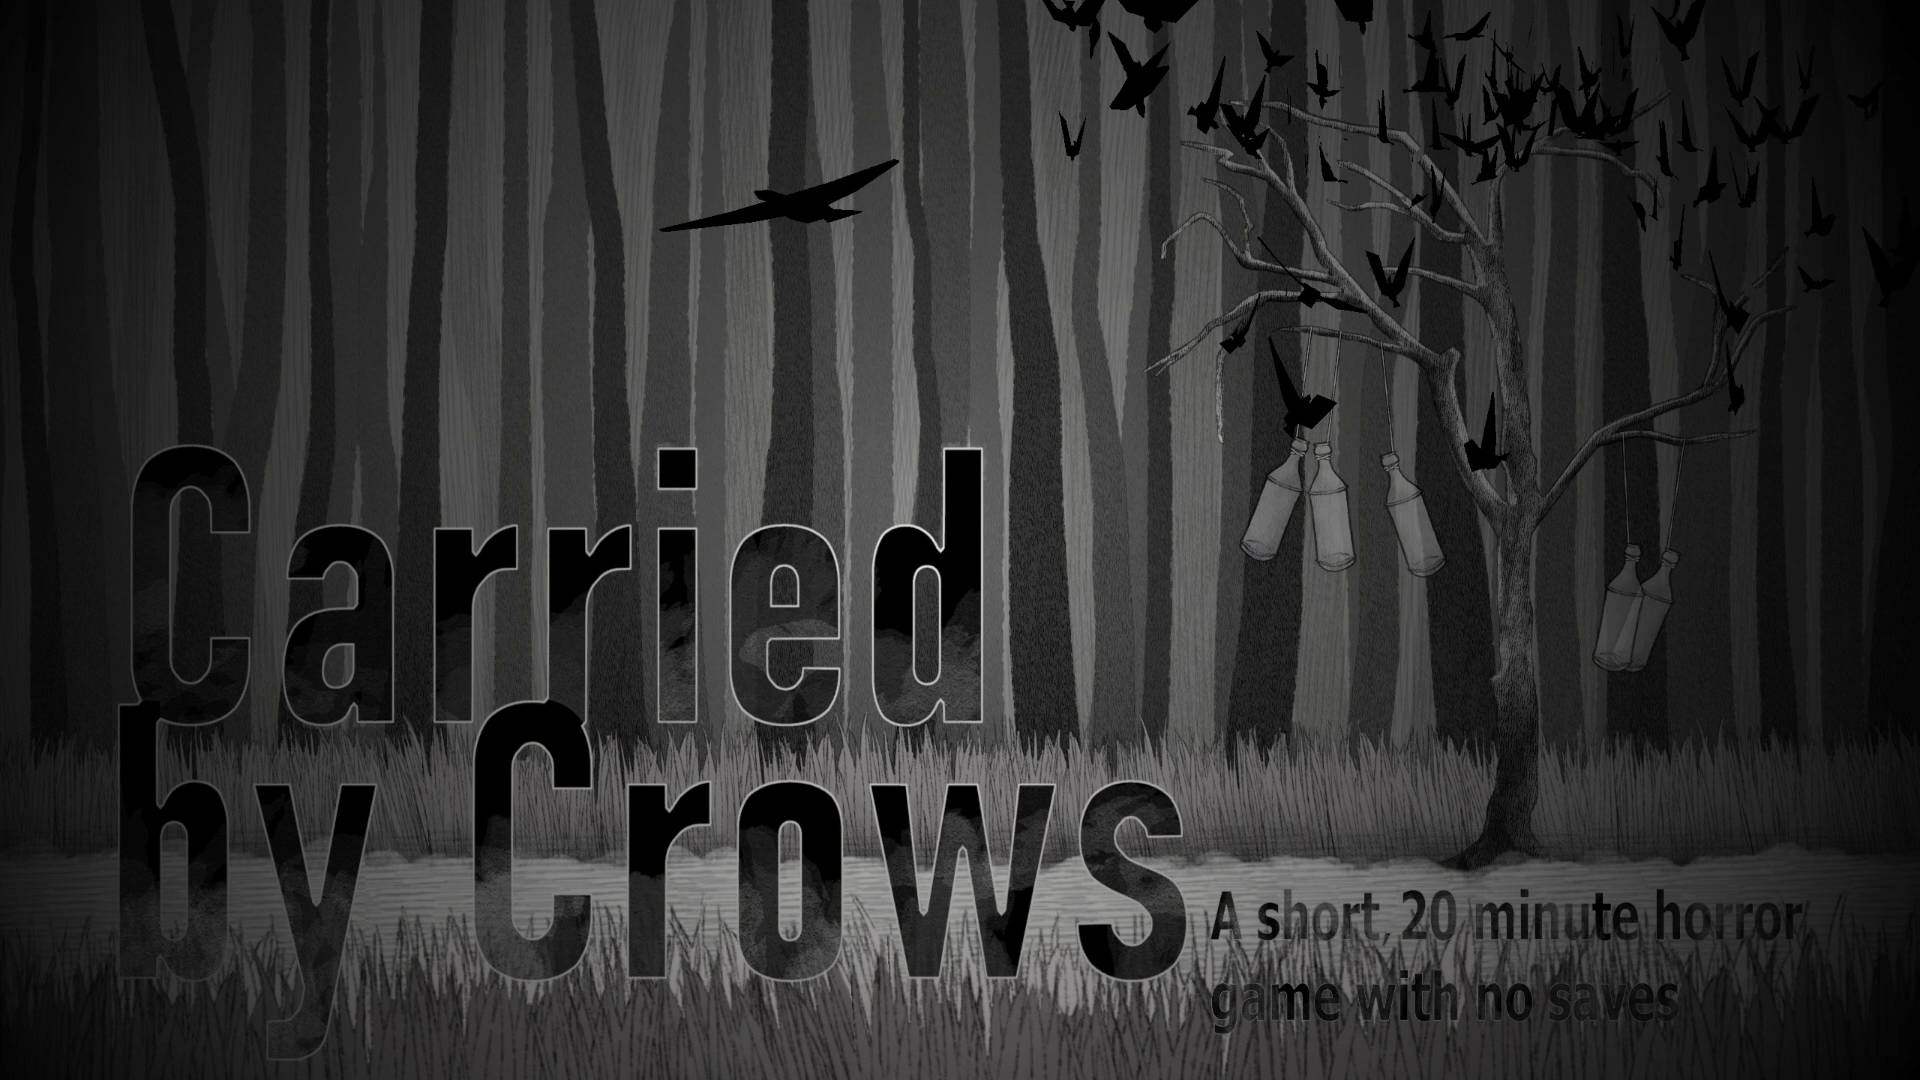 Carried by Crows